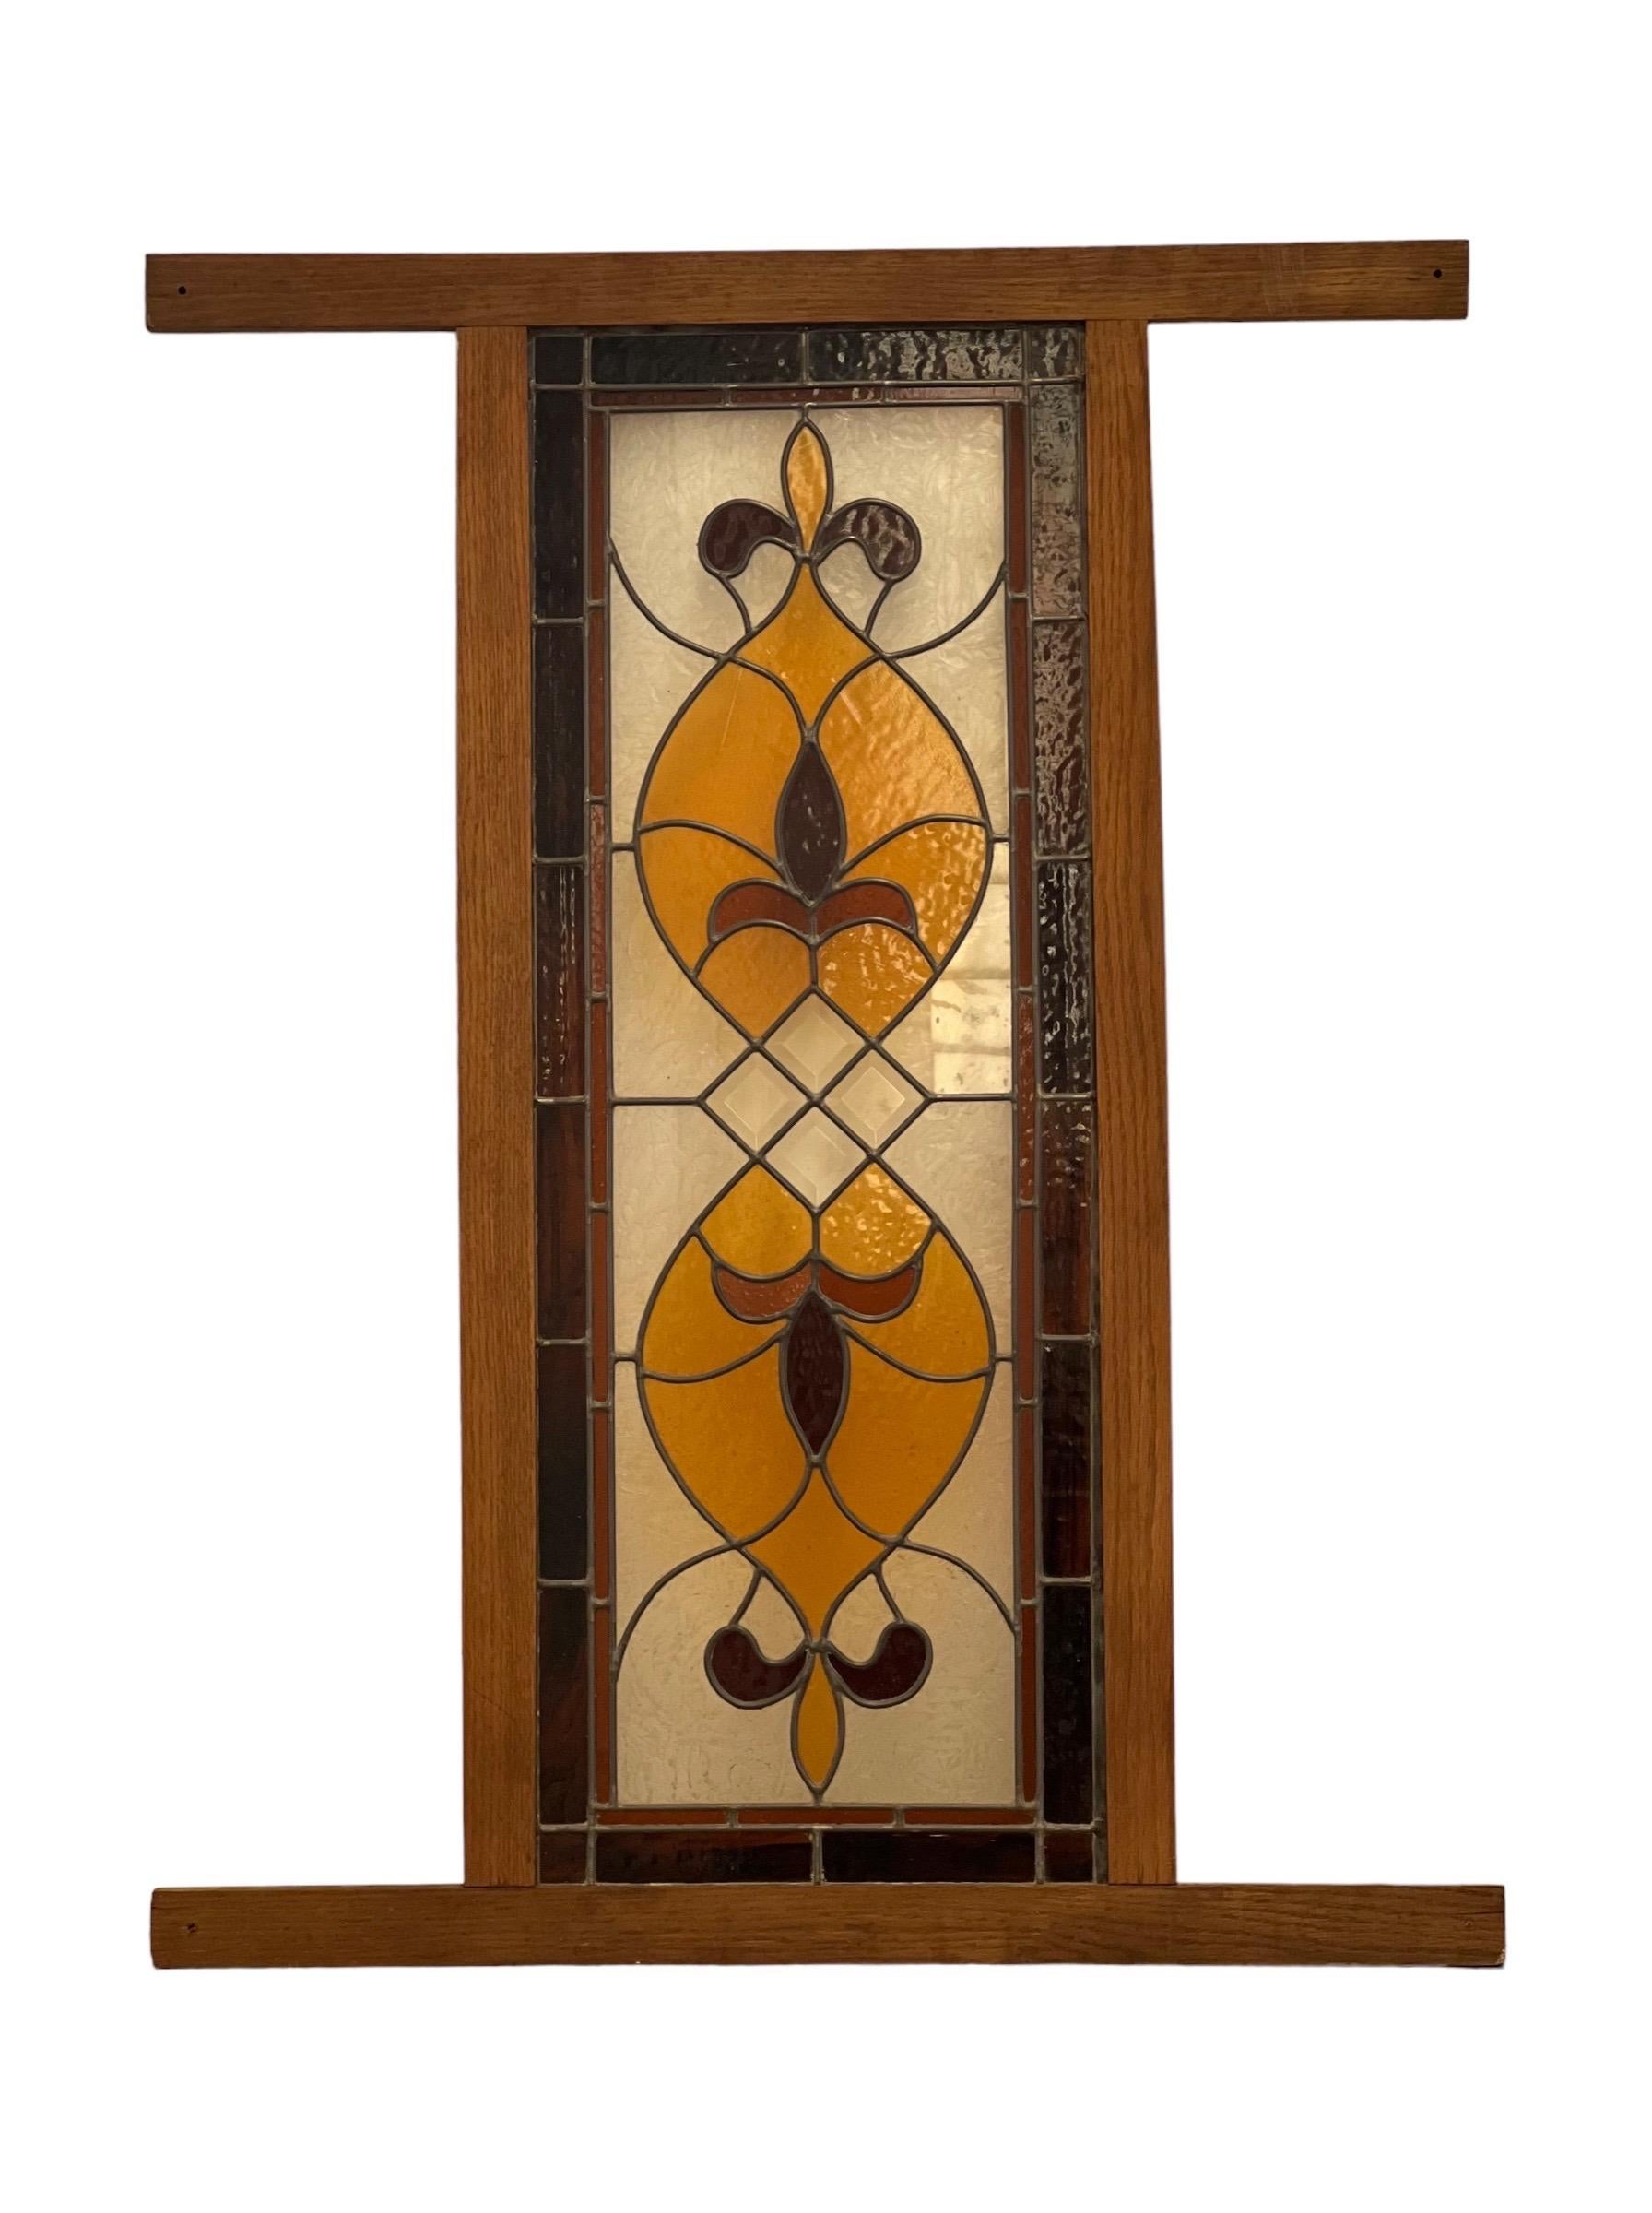 Vintage stained glass

Dimensions. 33.5 W ; 43 H.